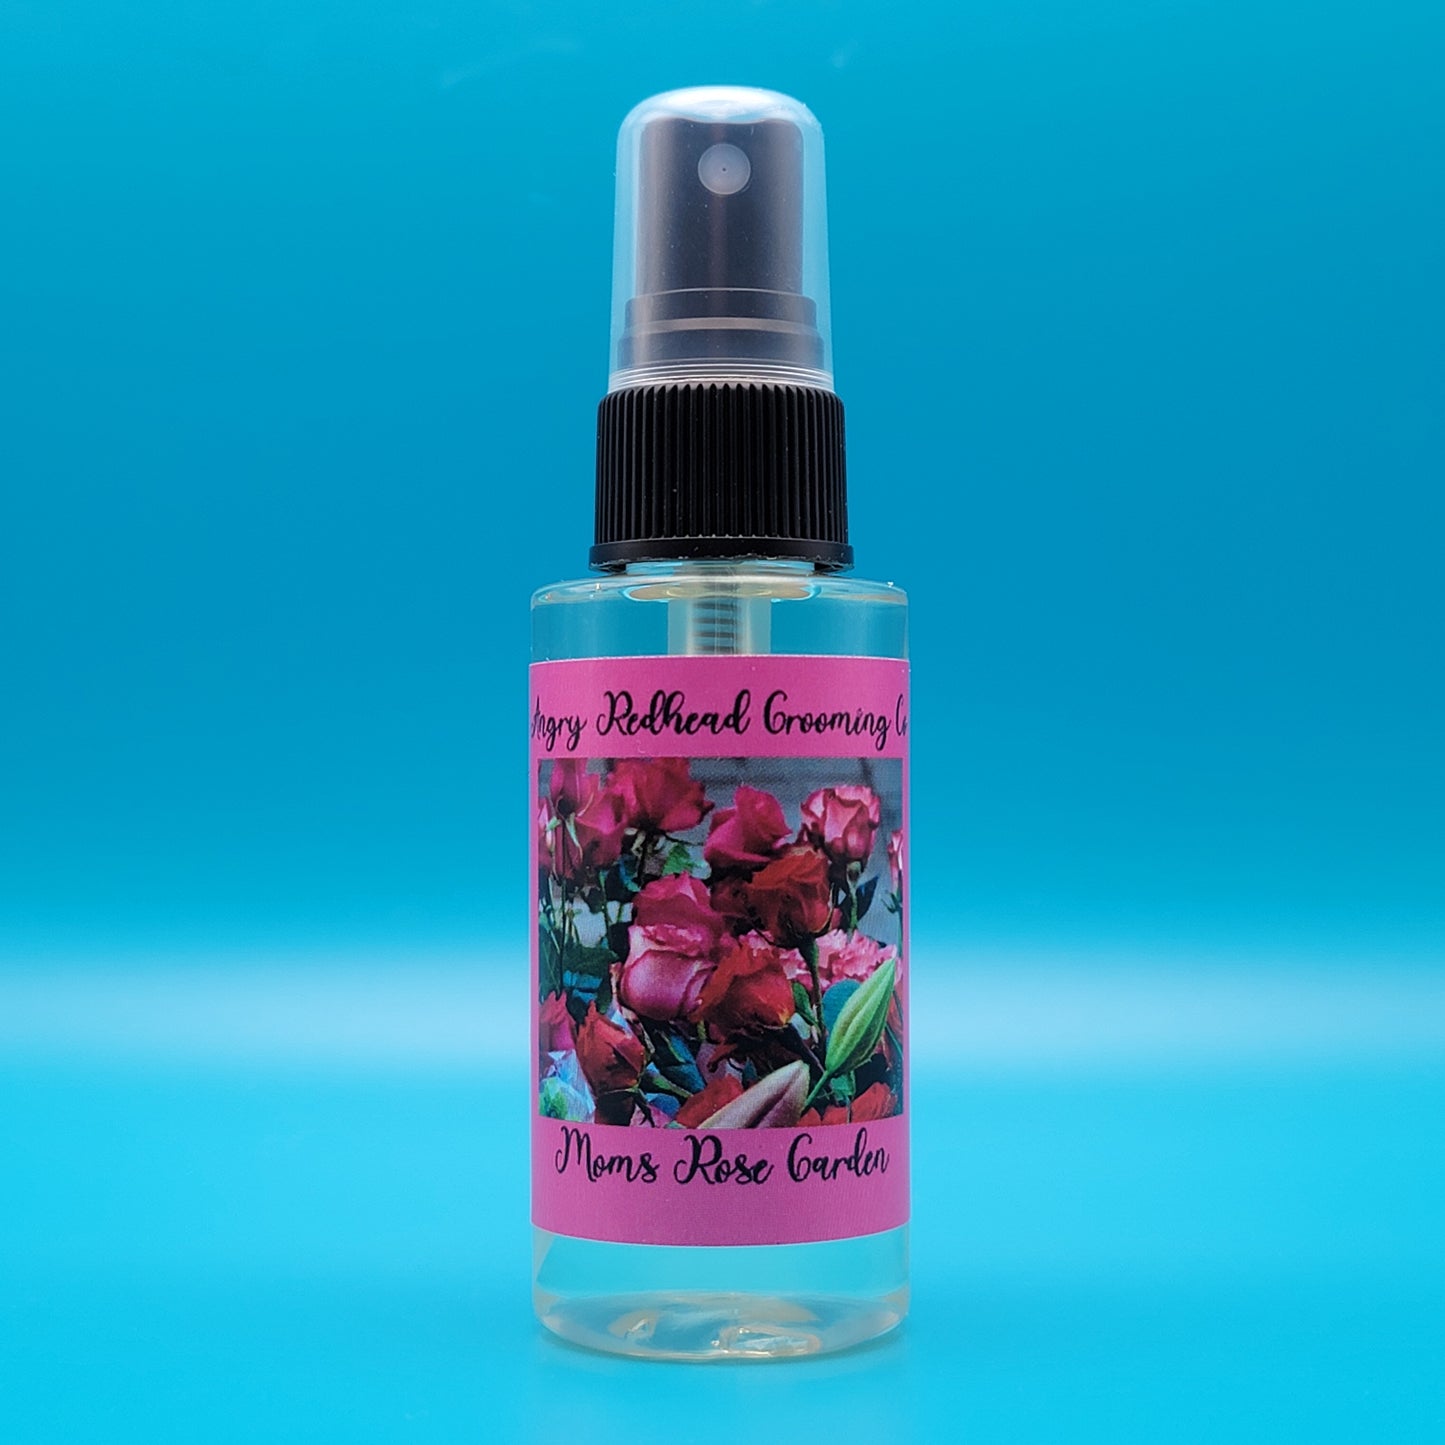 Mom's Rose Garden Body Mist by Angry Redhead Grooming Co - angryredheadgrooming.com